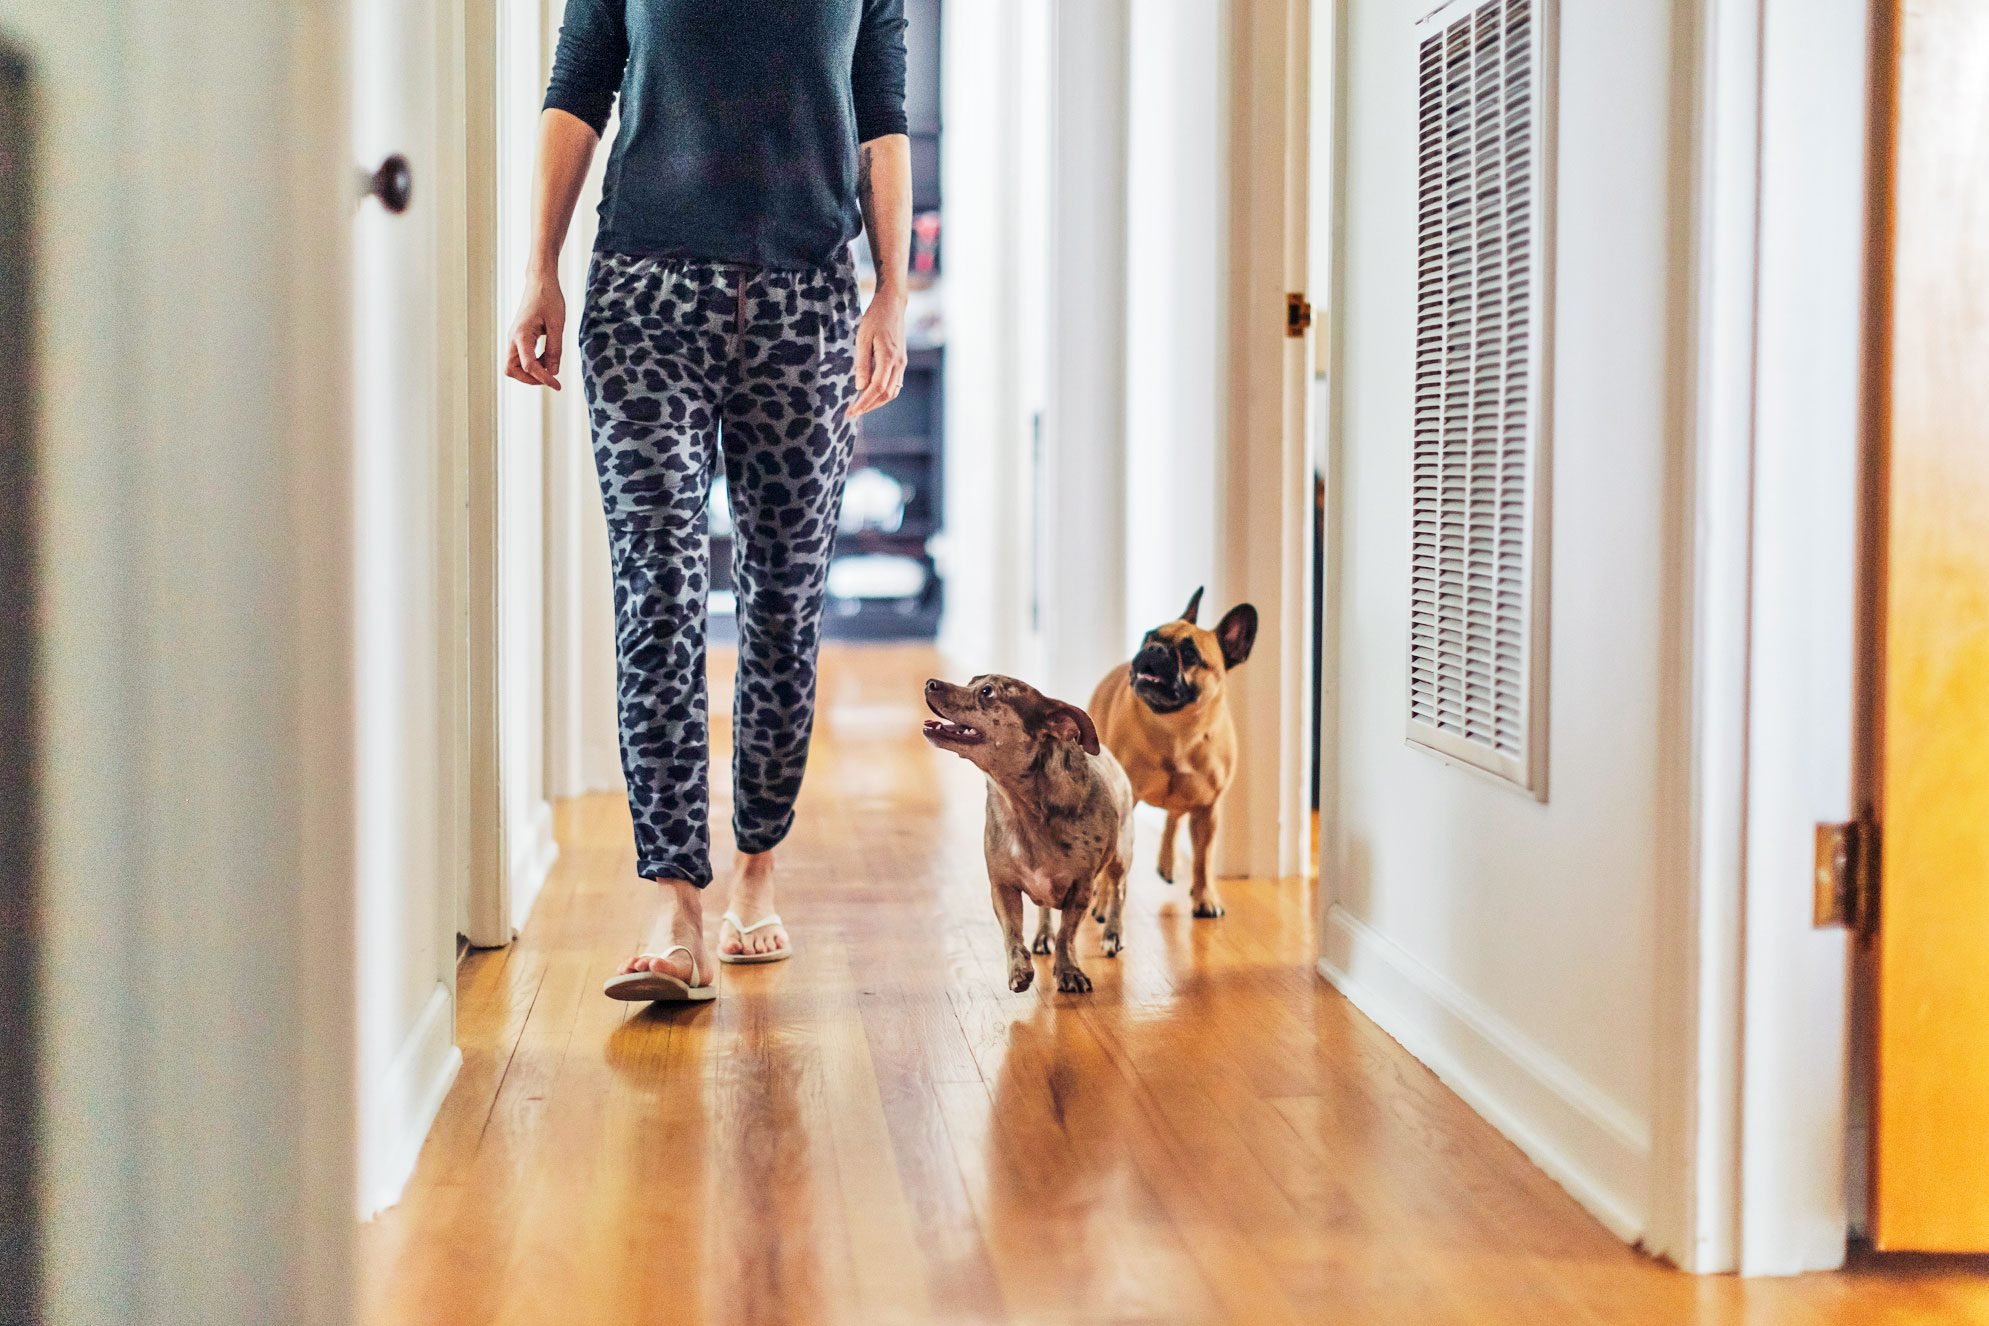 Why do dogs follow you around the house?